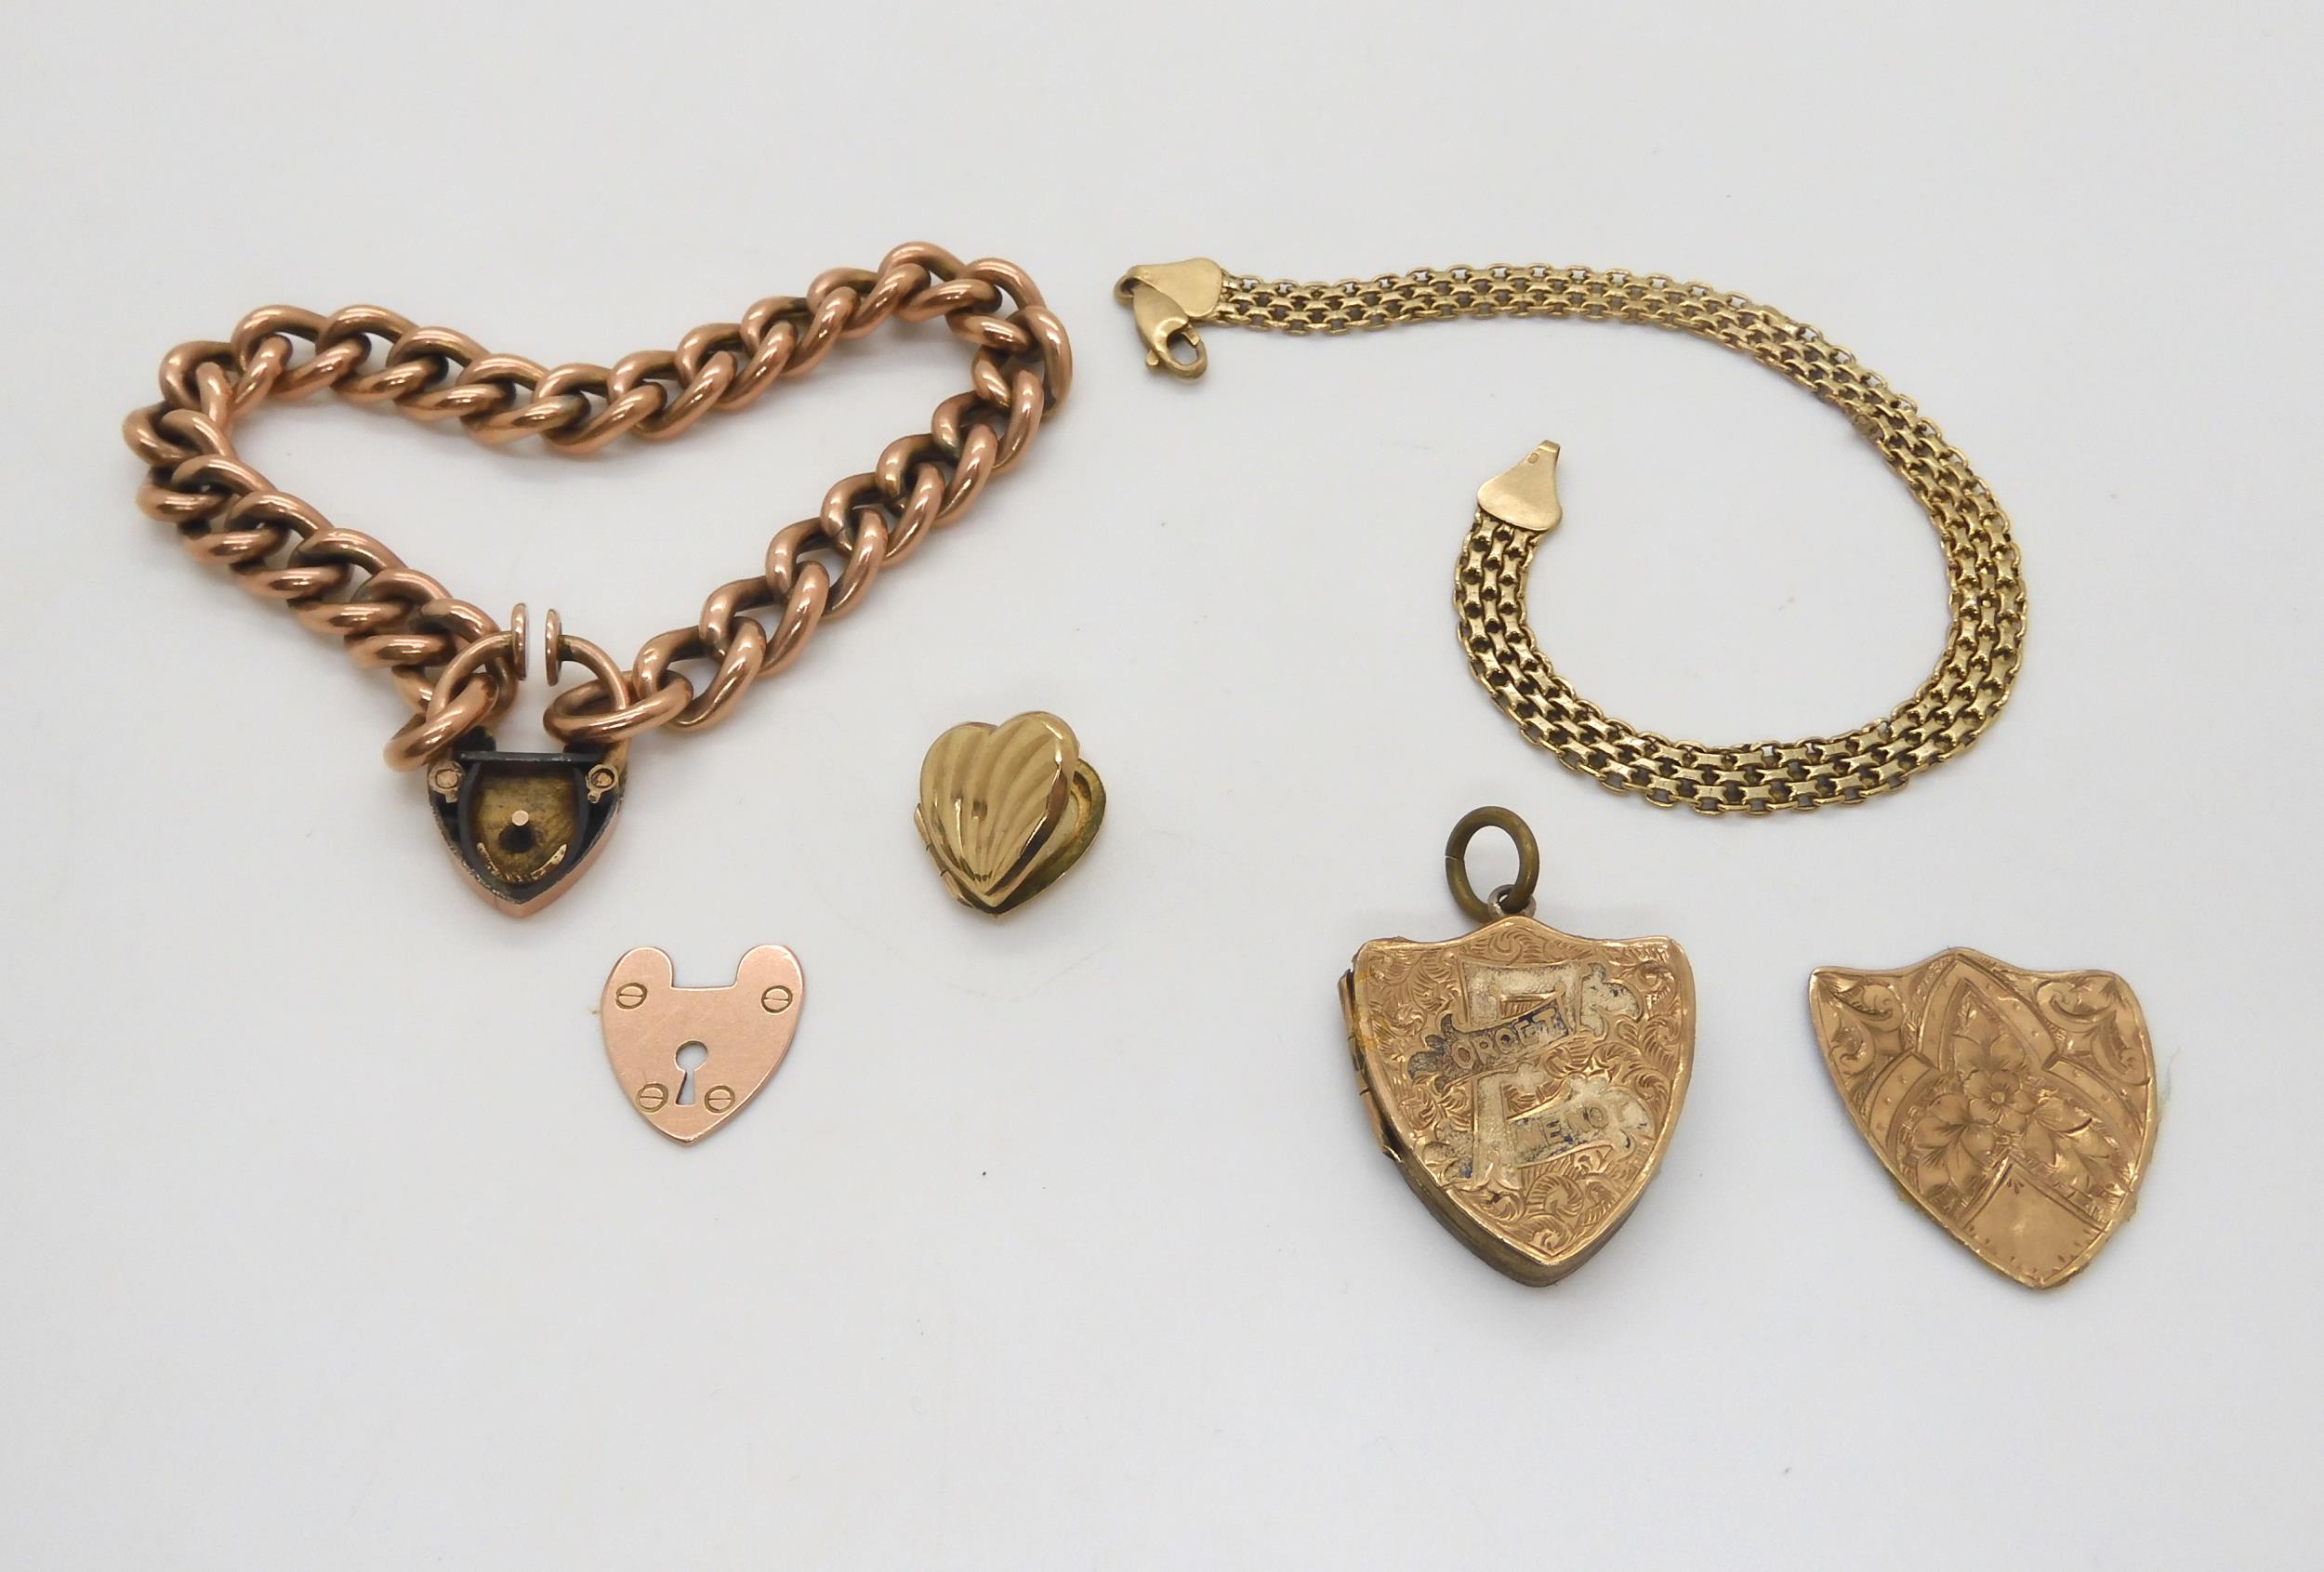 A 9ct rose gold bracelet, a further 9ct bracelet a 9ct locket and an early back & front locket,